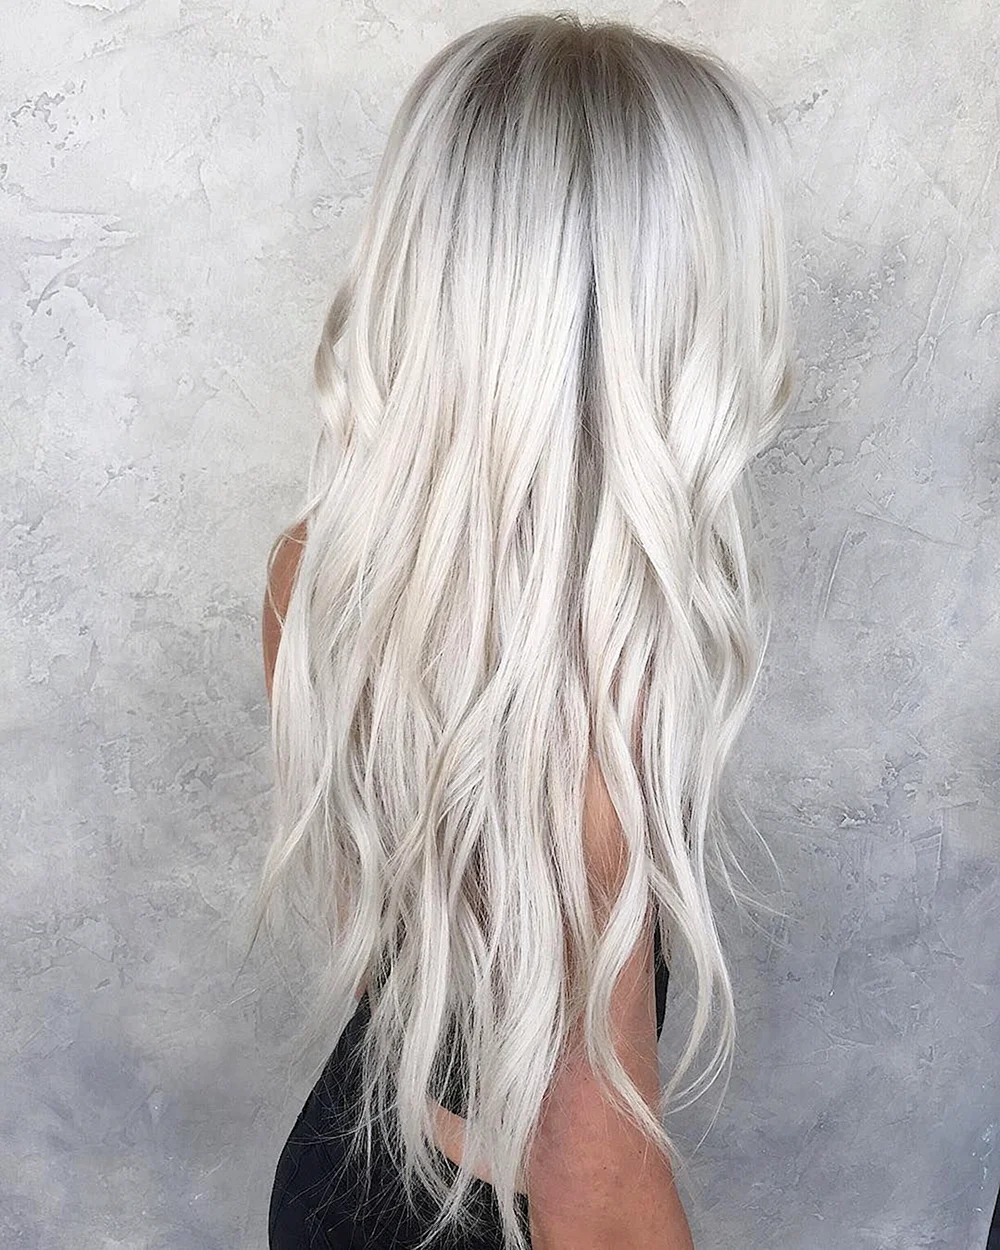 Icy Silver hair